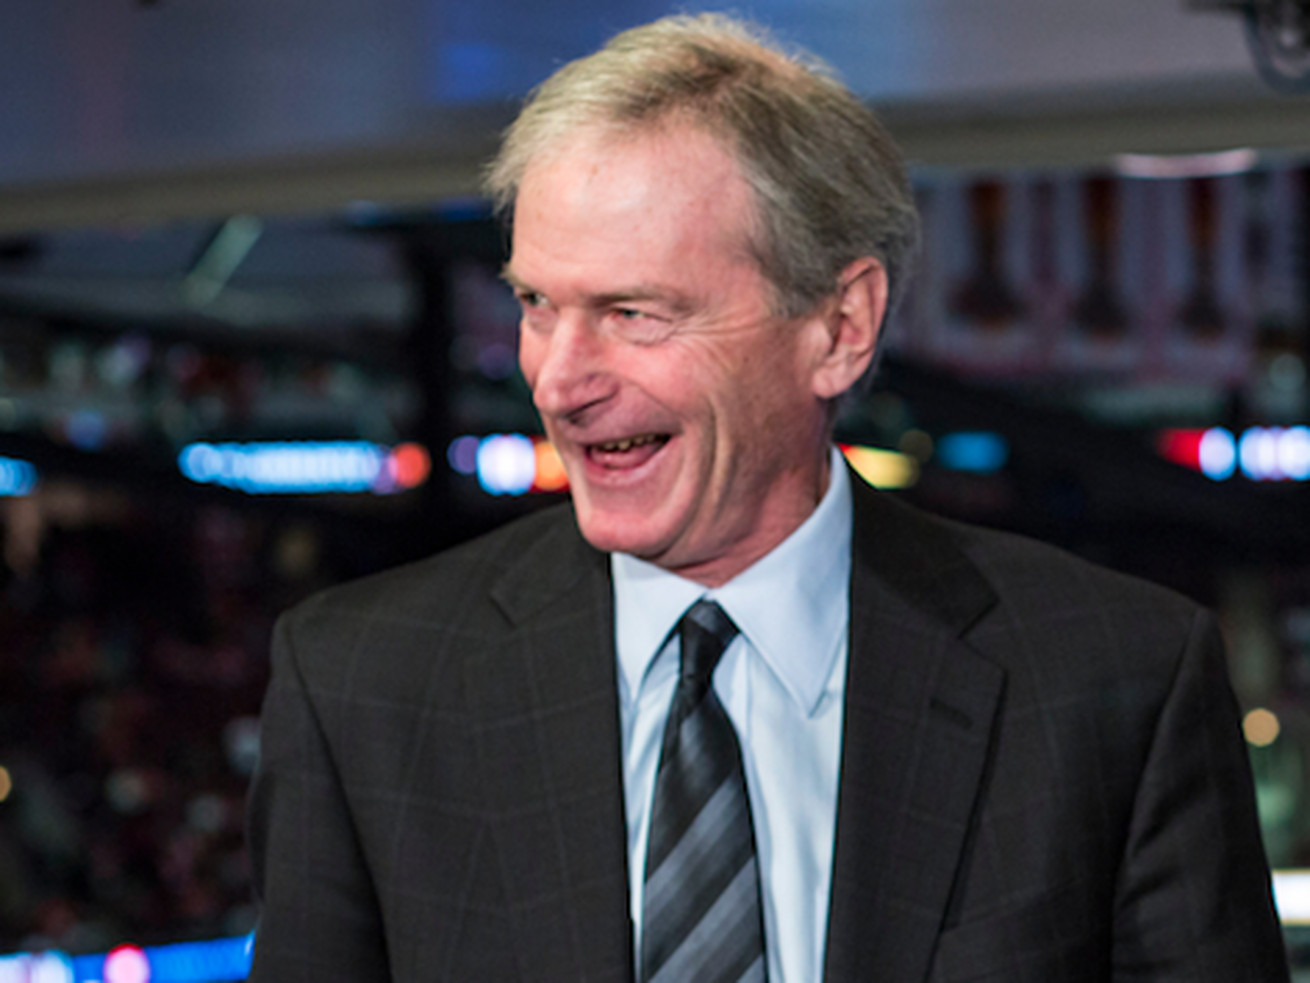 “I wish I didn’t say that,” Pat Foley said during Monday’s Blackhawks game, referring to his “bullet in my head” remark. “I’m sorry if I offended some folks. Apparently I did, so I apologize.”